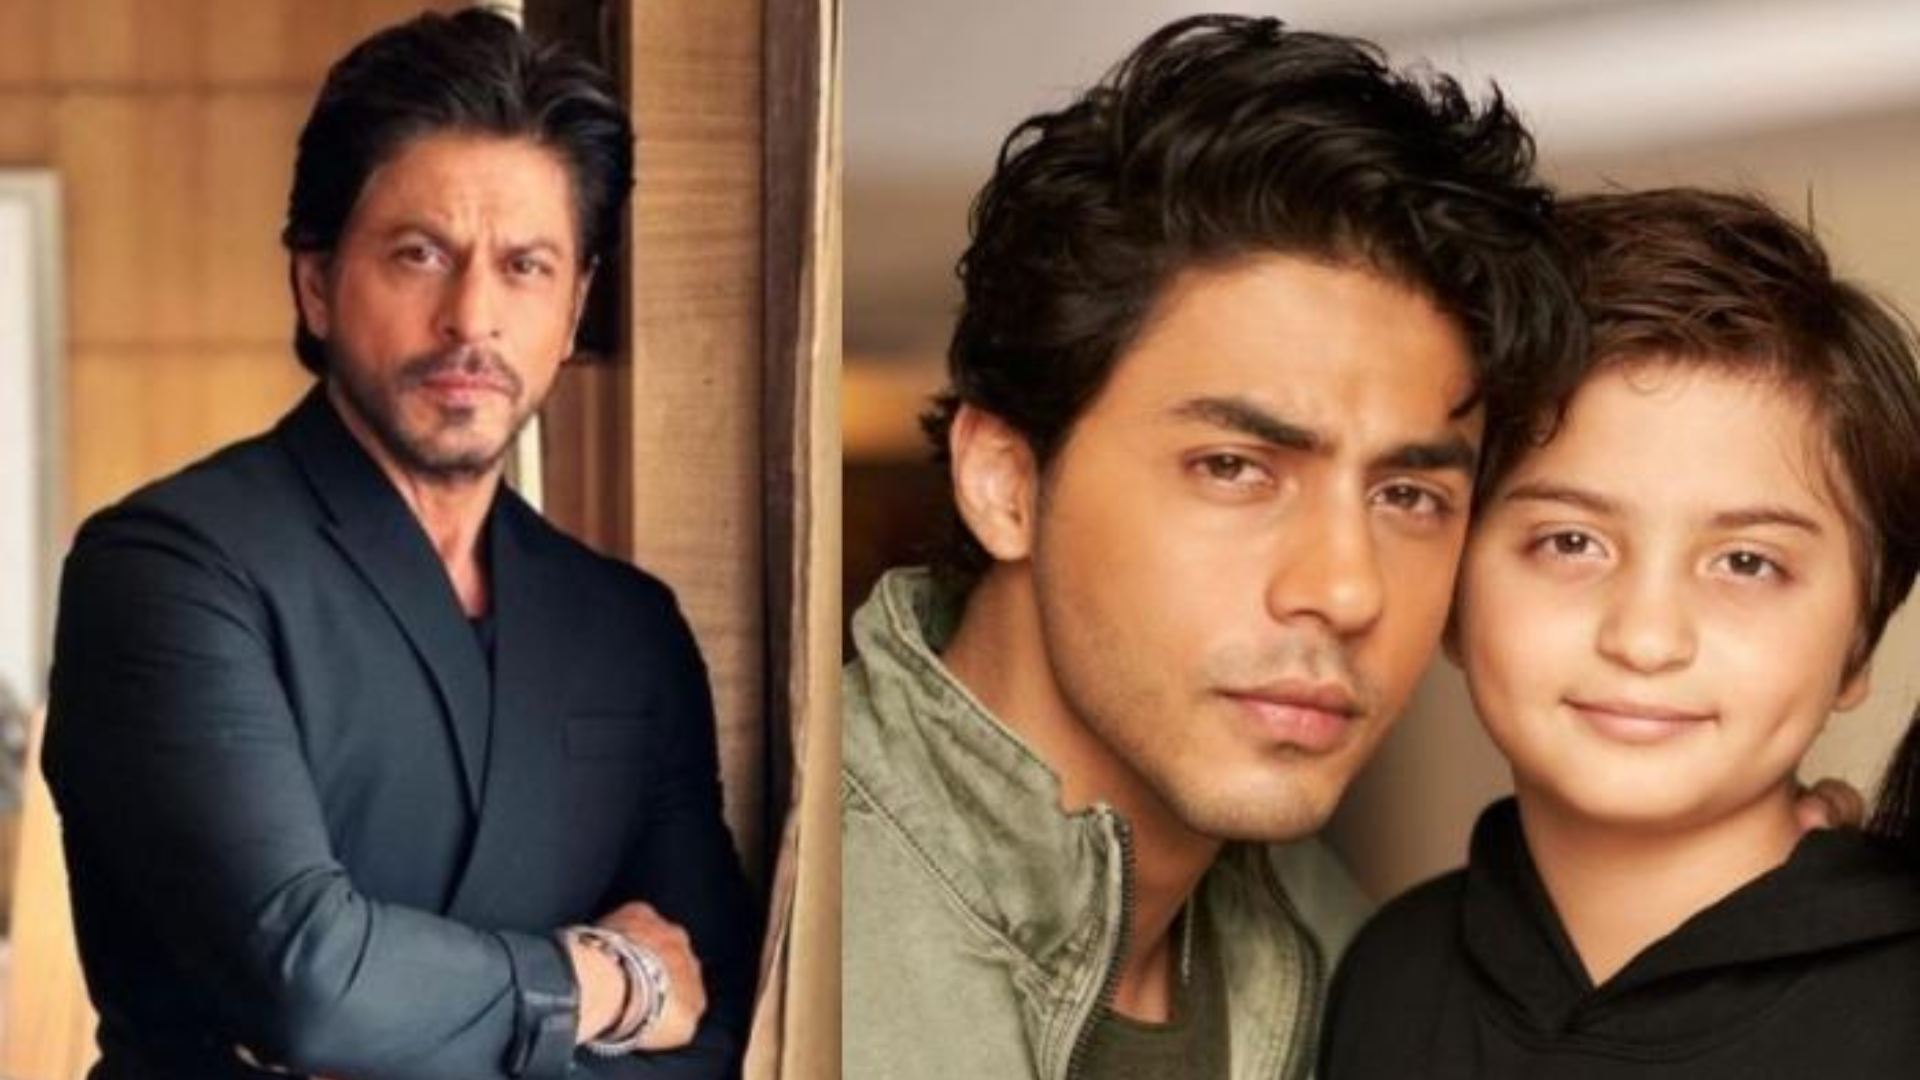 Why Is Shah Rukh Khan Avoiding Media Since 2021? ‘He's Mad For What They Did To His Son’: Here's What We Know